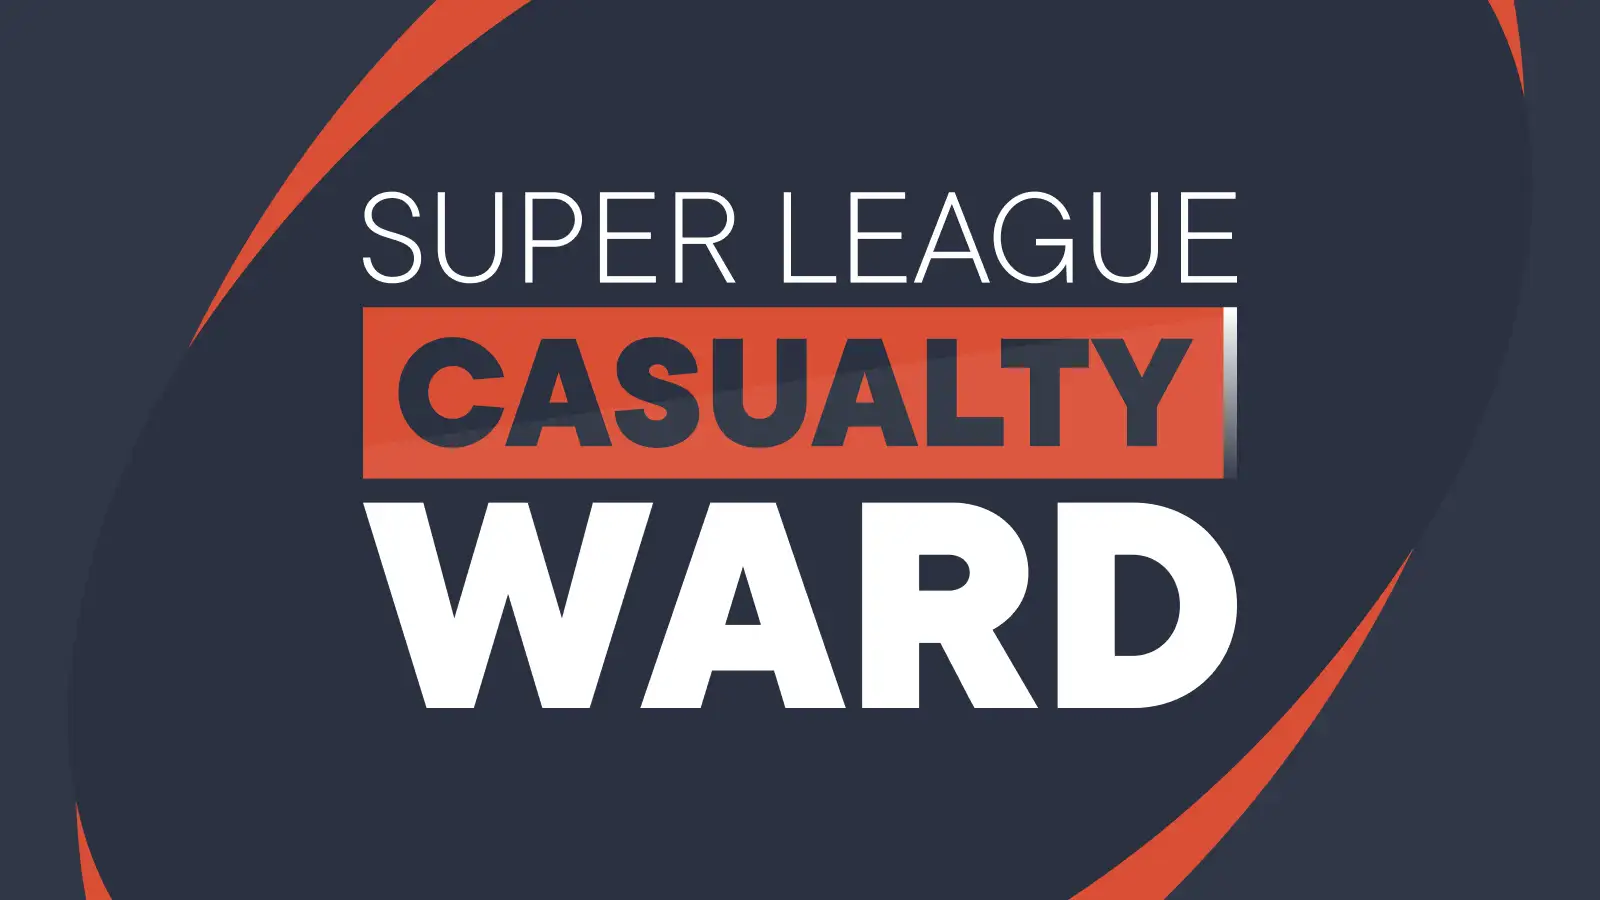 Super League Casualty Ward featuring every club, timeframes and expected returns